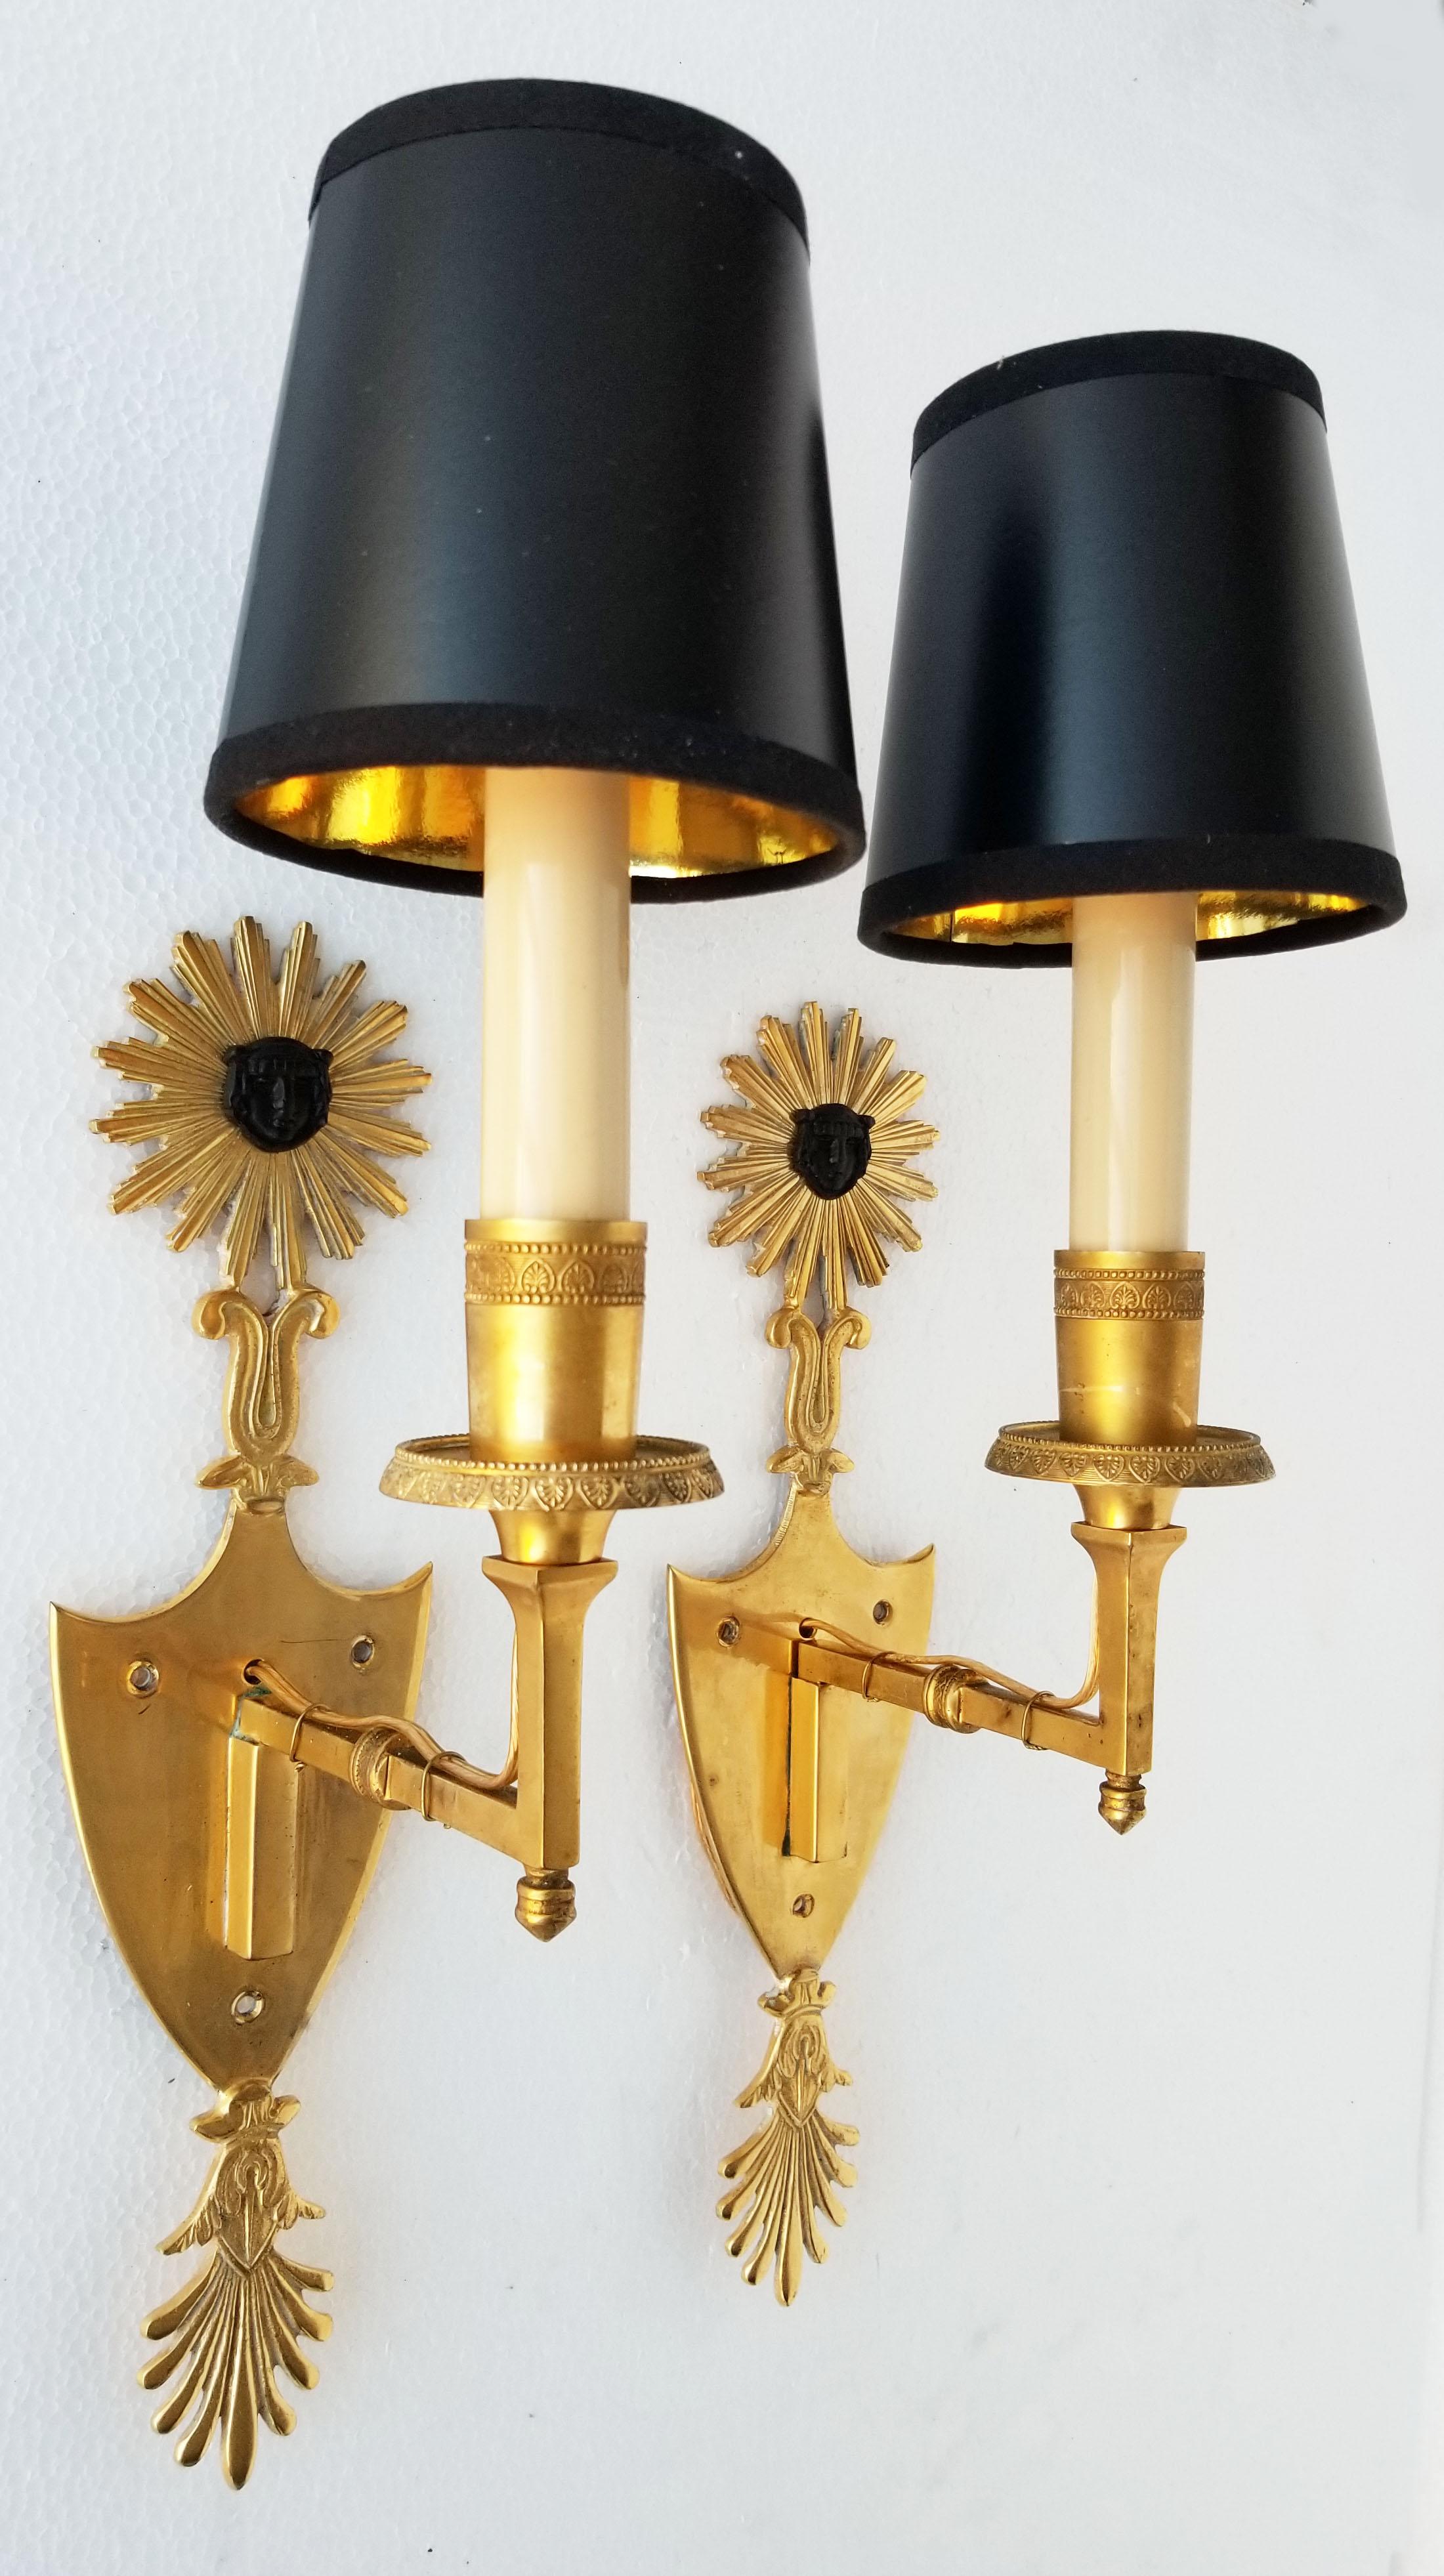 Neoclassical Revival Pair of Bronze Andre Arbus Style Sconces, 4 Pairs Available, Priced by Pair